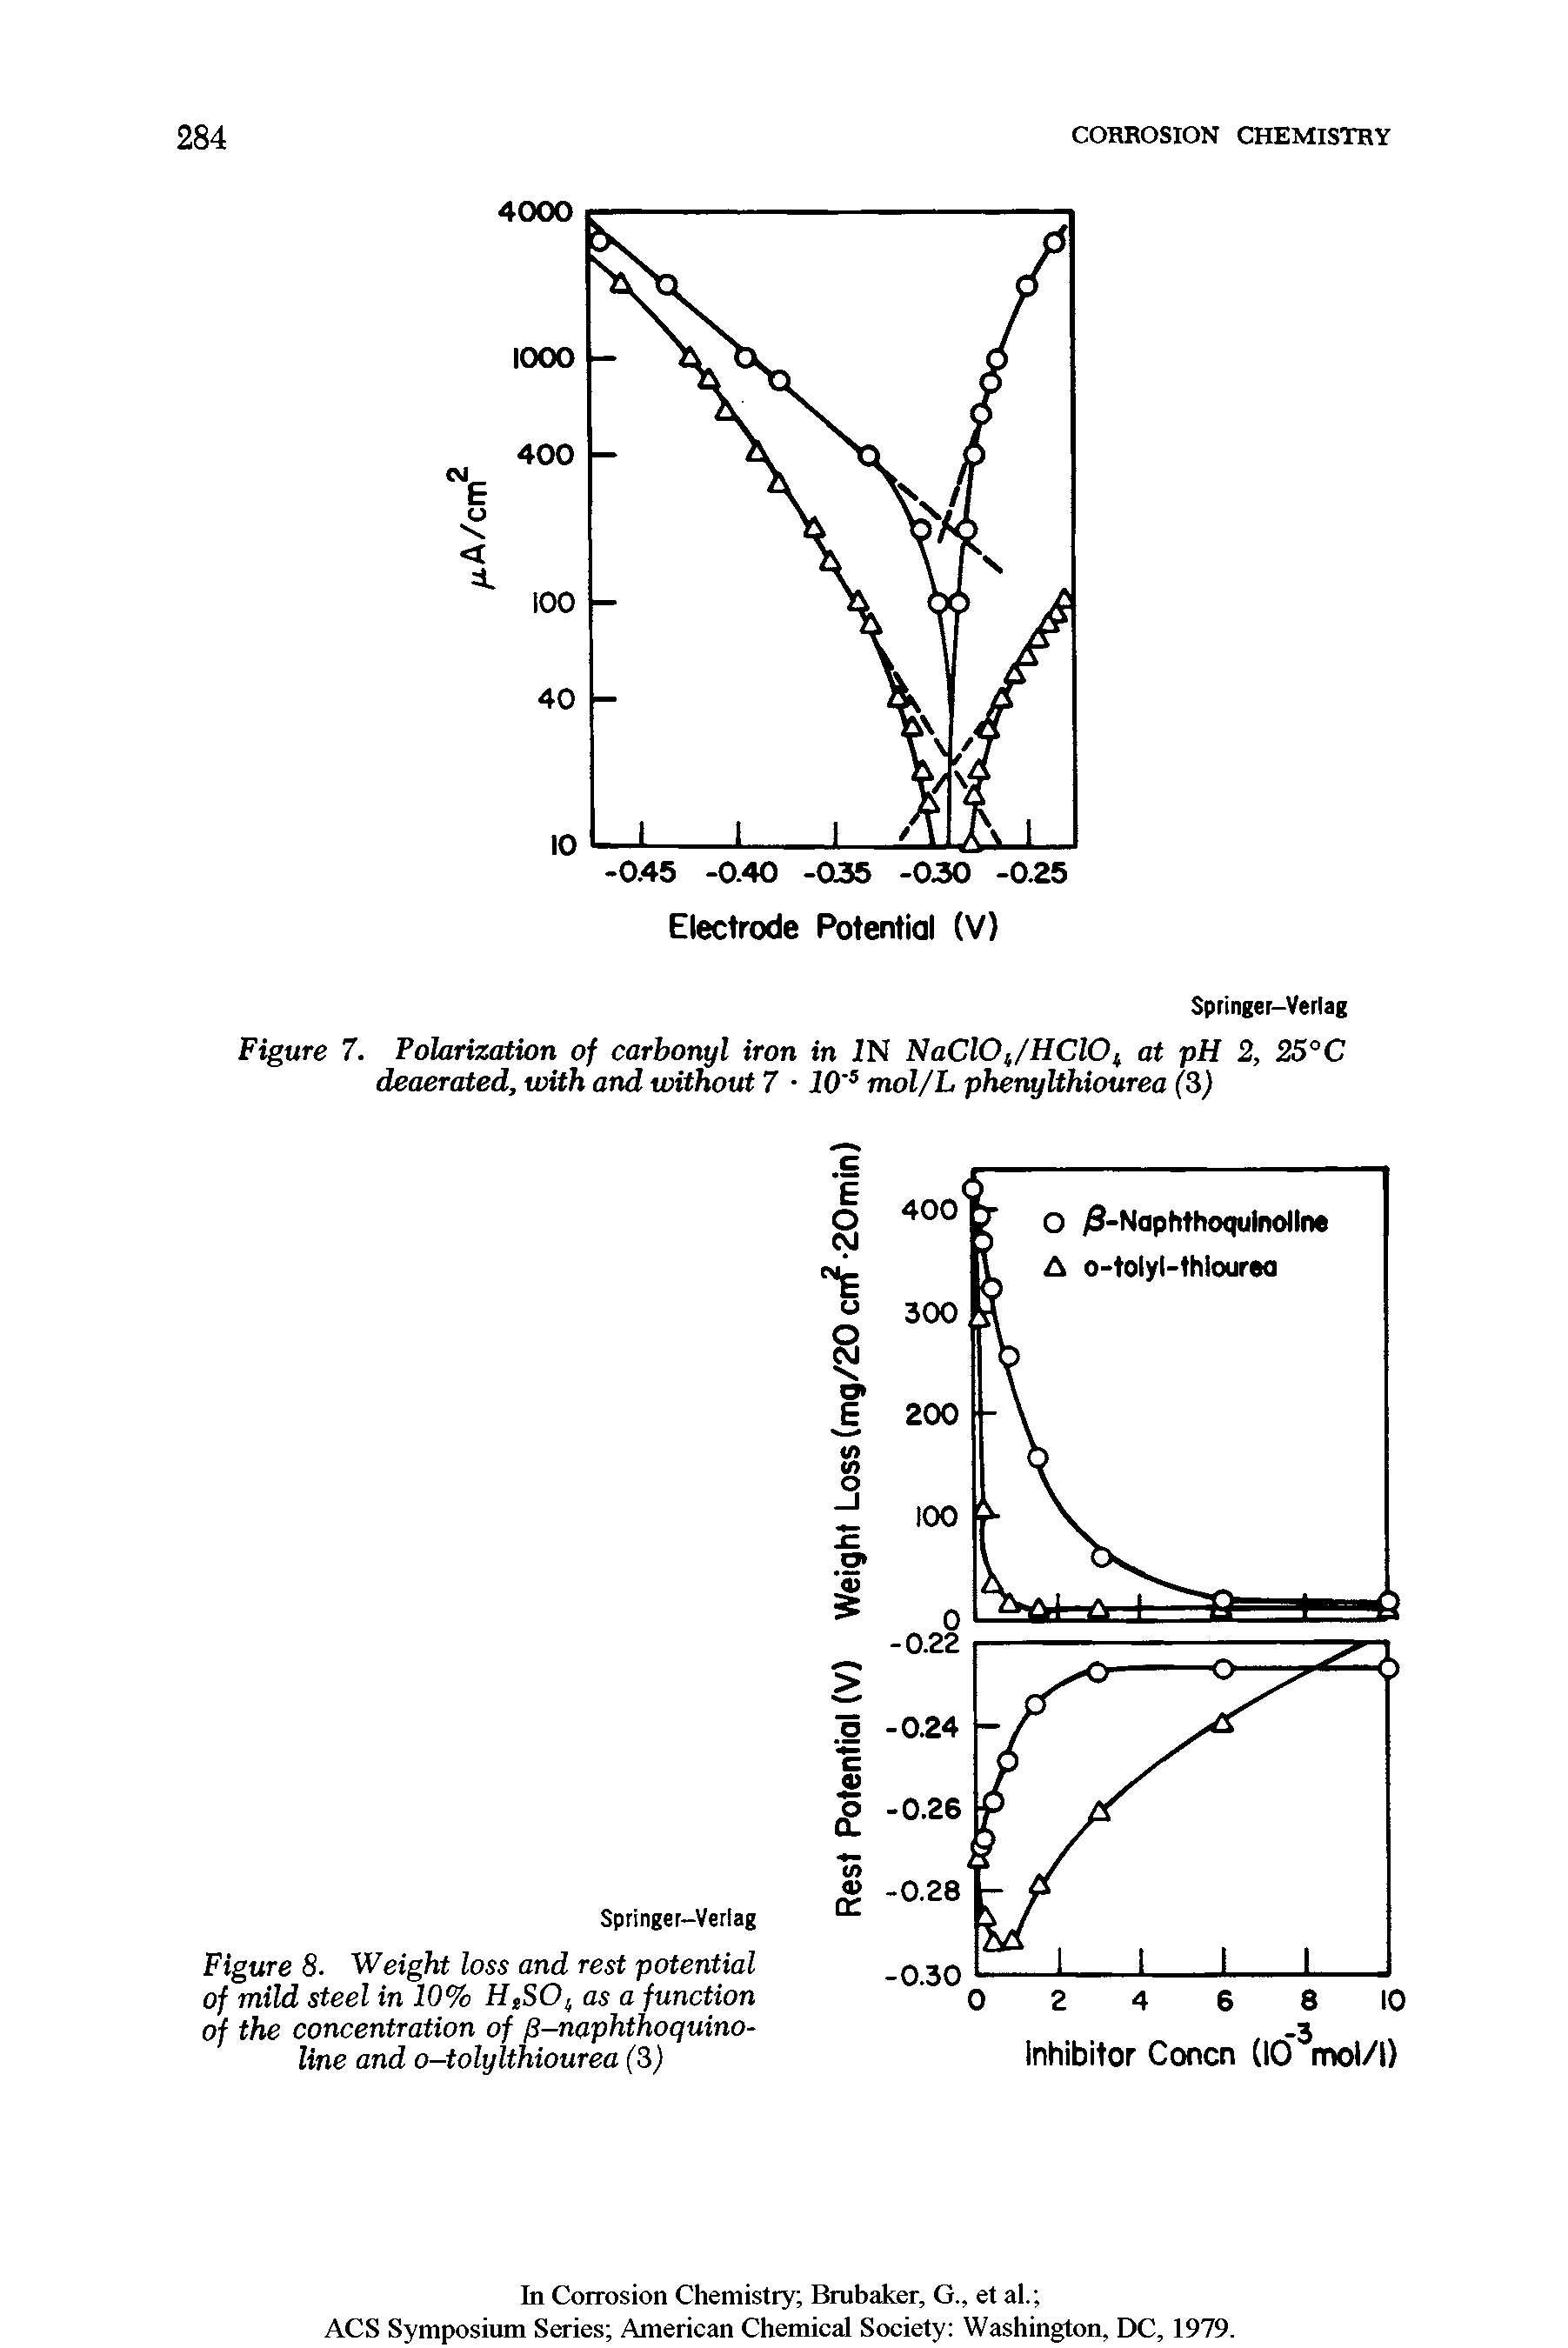 Figure 7. Polarization of carbonyl iron in IN NaClO /HClO at pH 2, 25°C deaerated, with and without 7 10 mol/L phenylthiourea (3)...